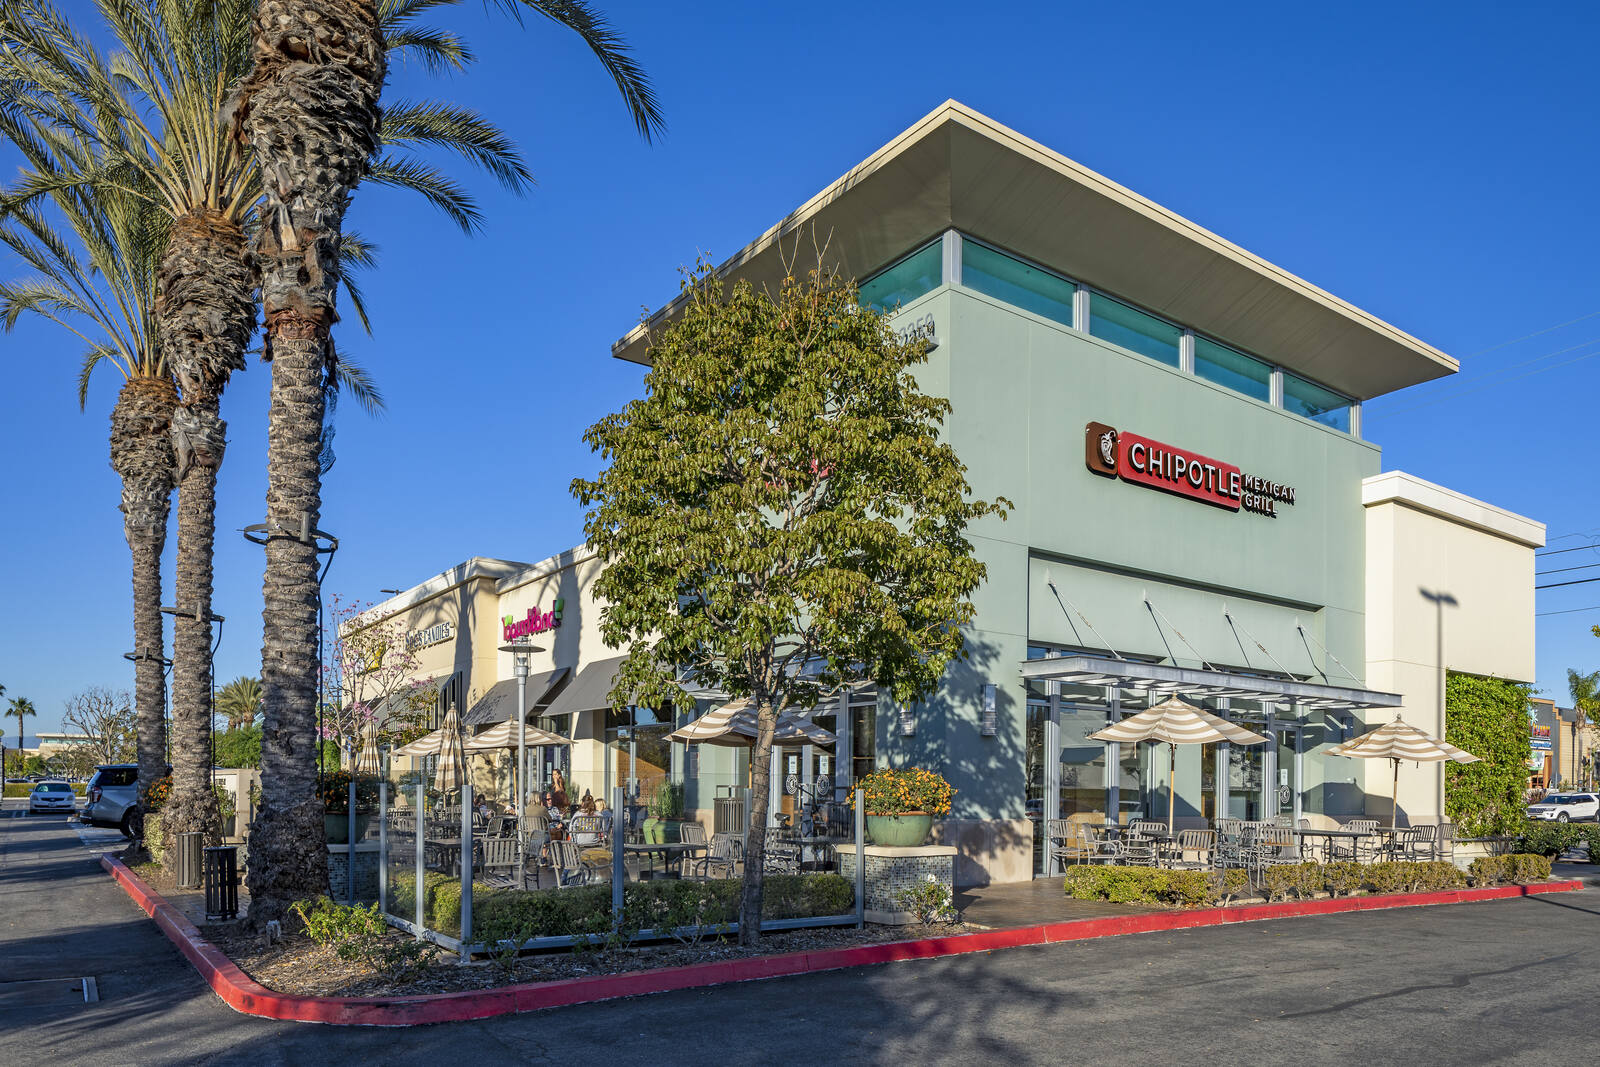 The Shops at Rossmoor